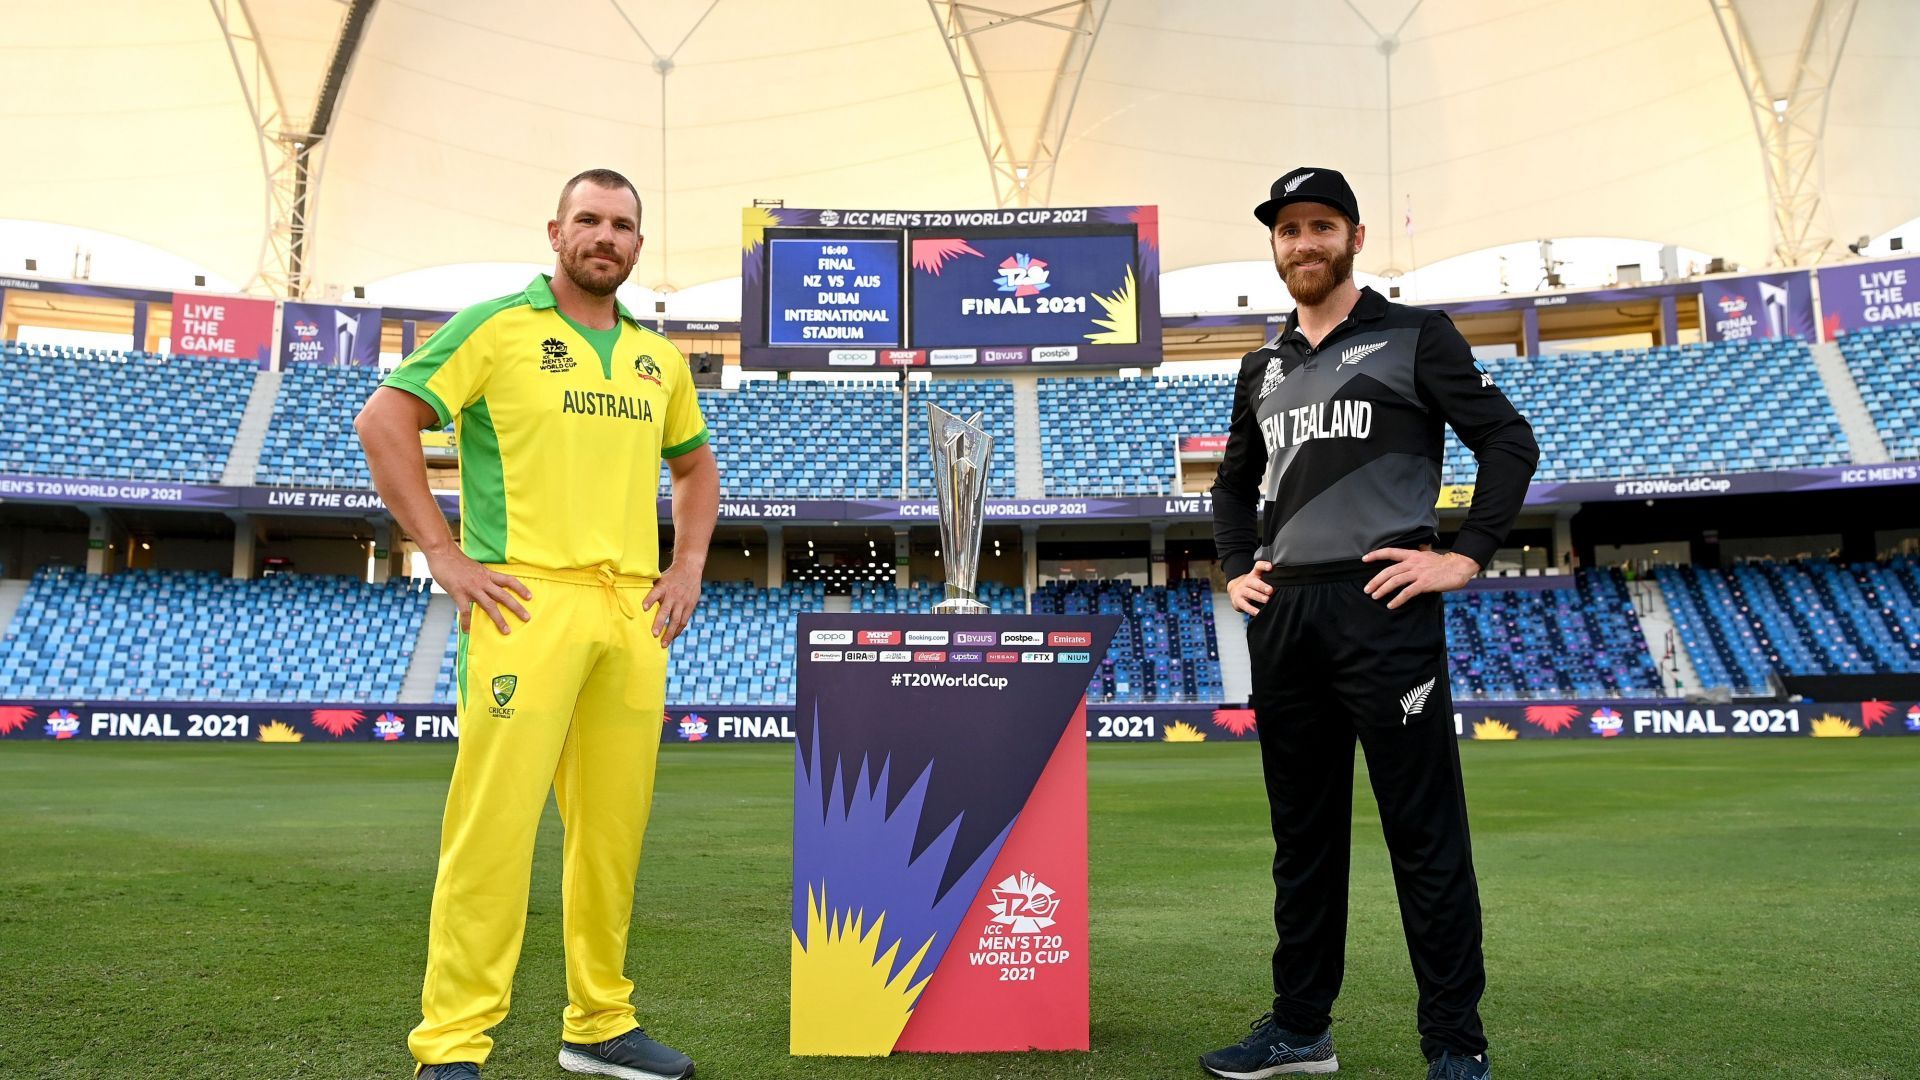 Aaron Finch and Kane Williamson posing with the trophy. (Image: ICC)